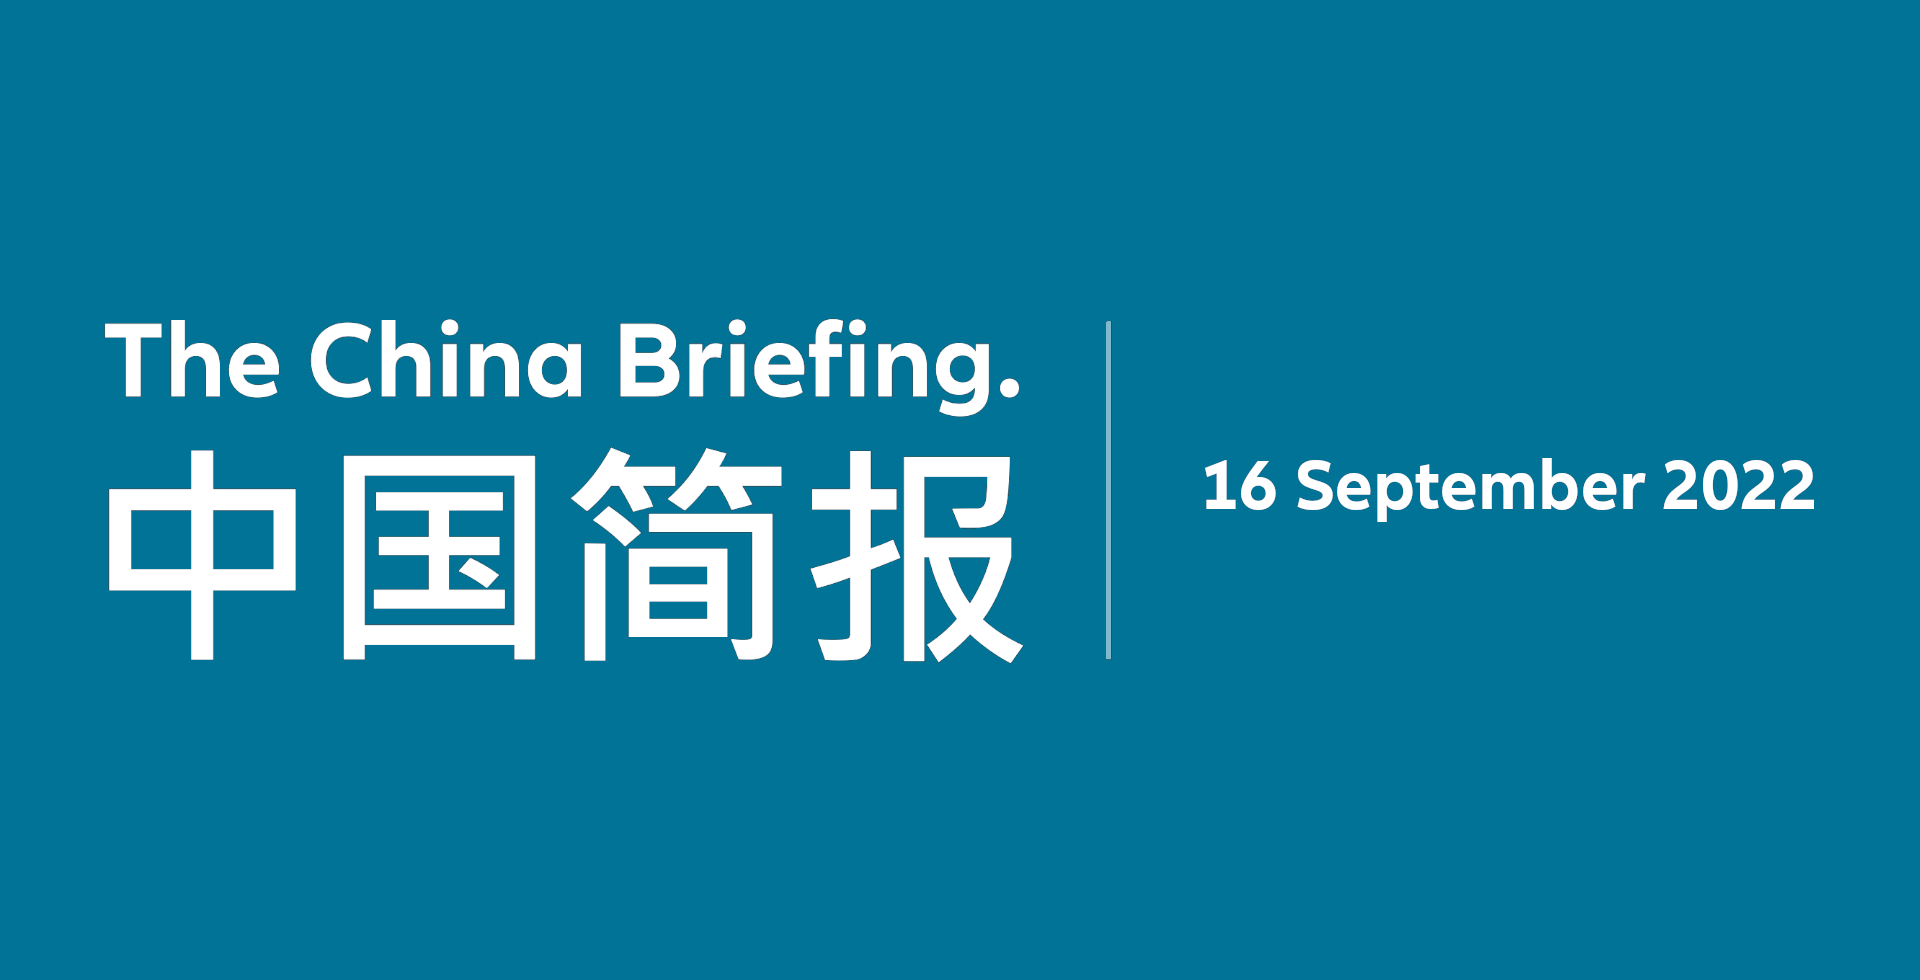 The China Briefing 16th of September 2022